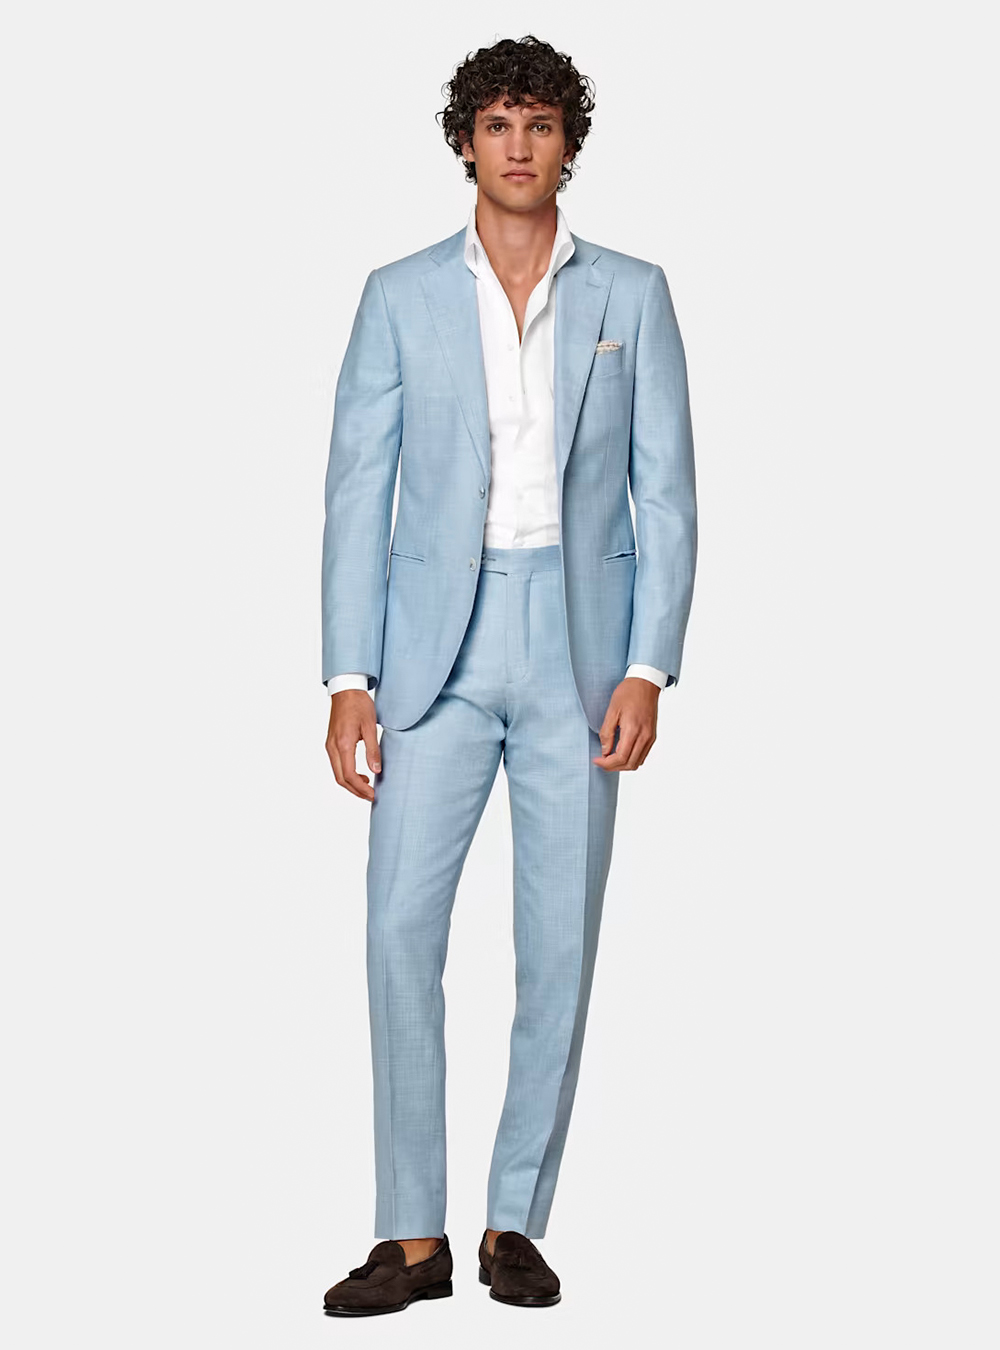 11 Blue Suit and Brown Shoes Outfits for Men - Suits Expert